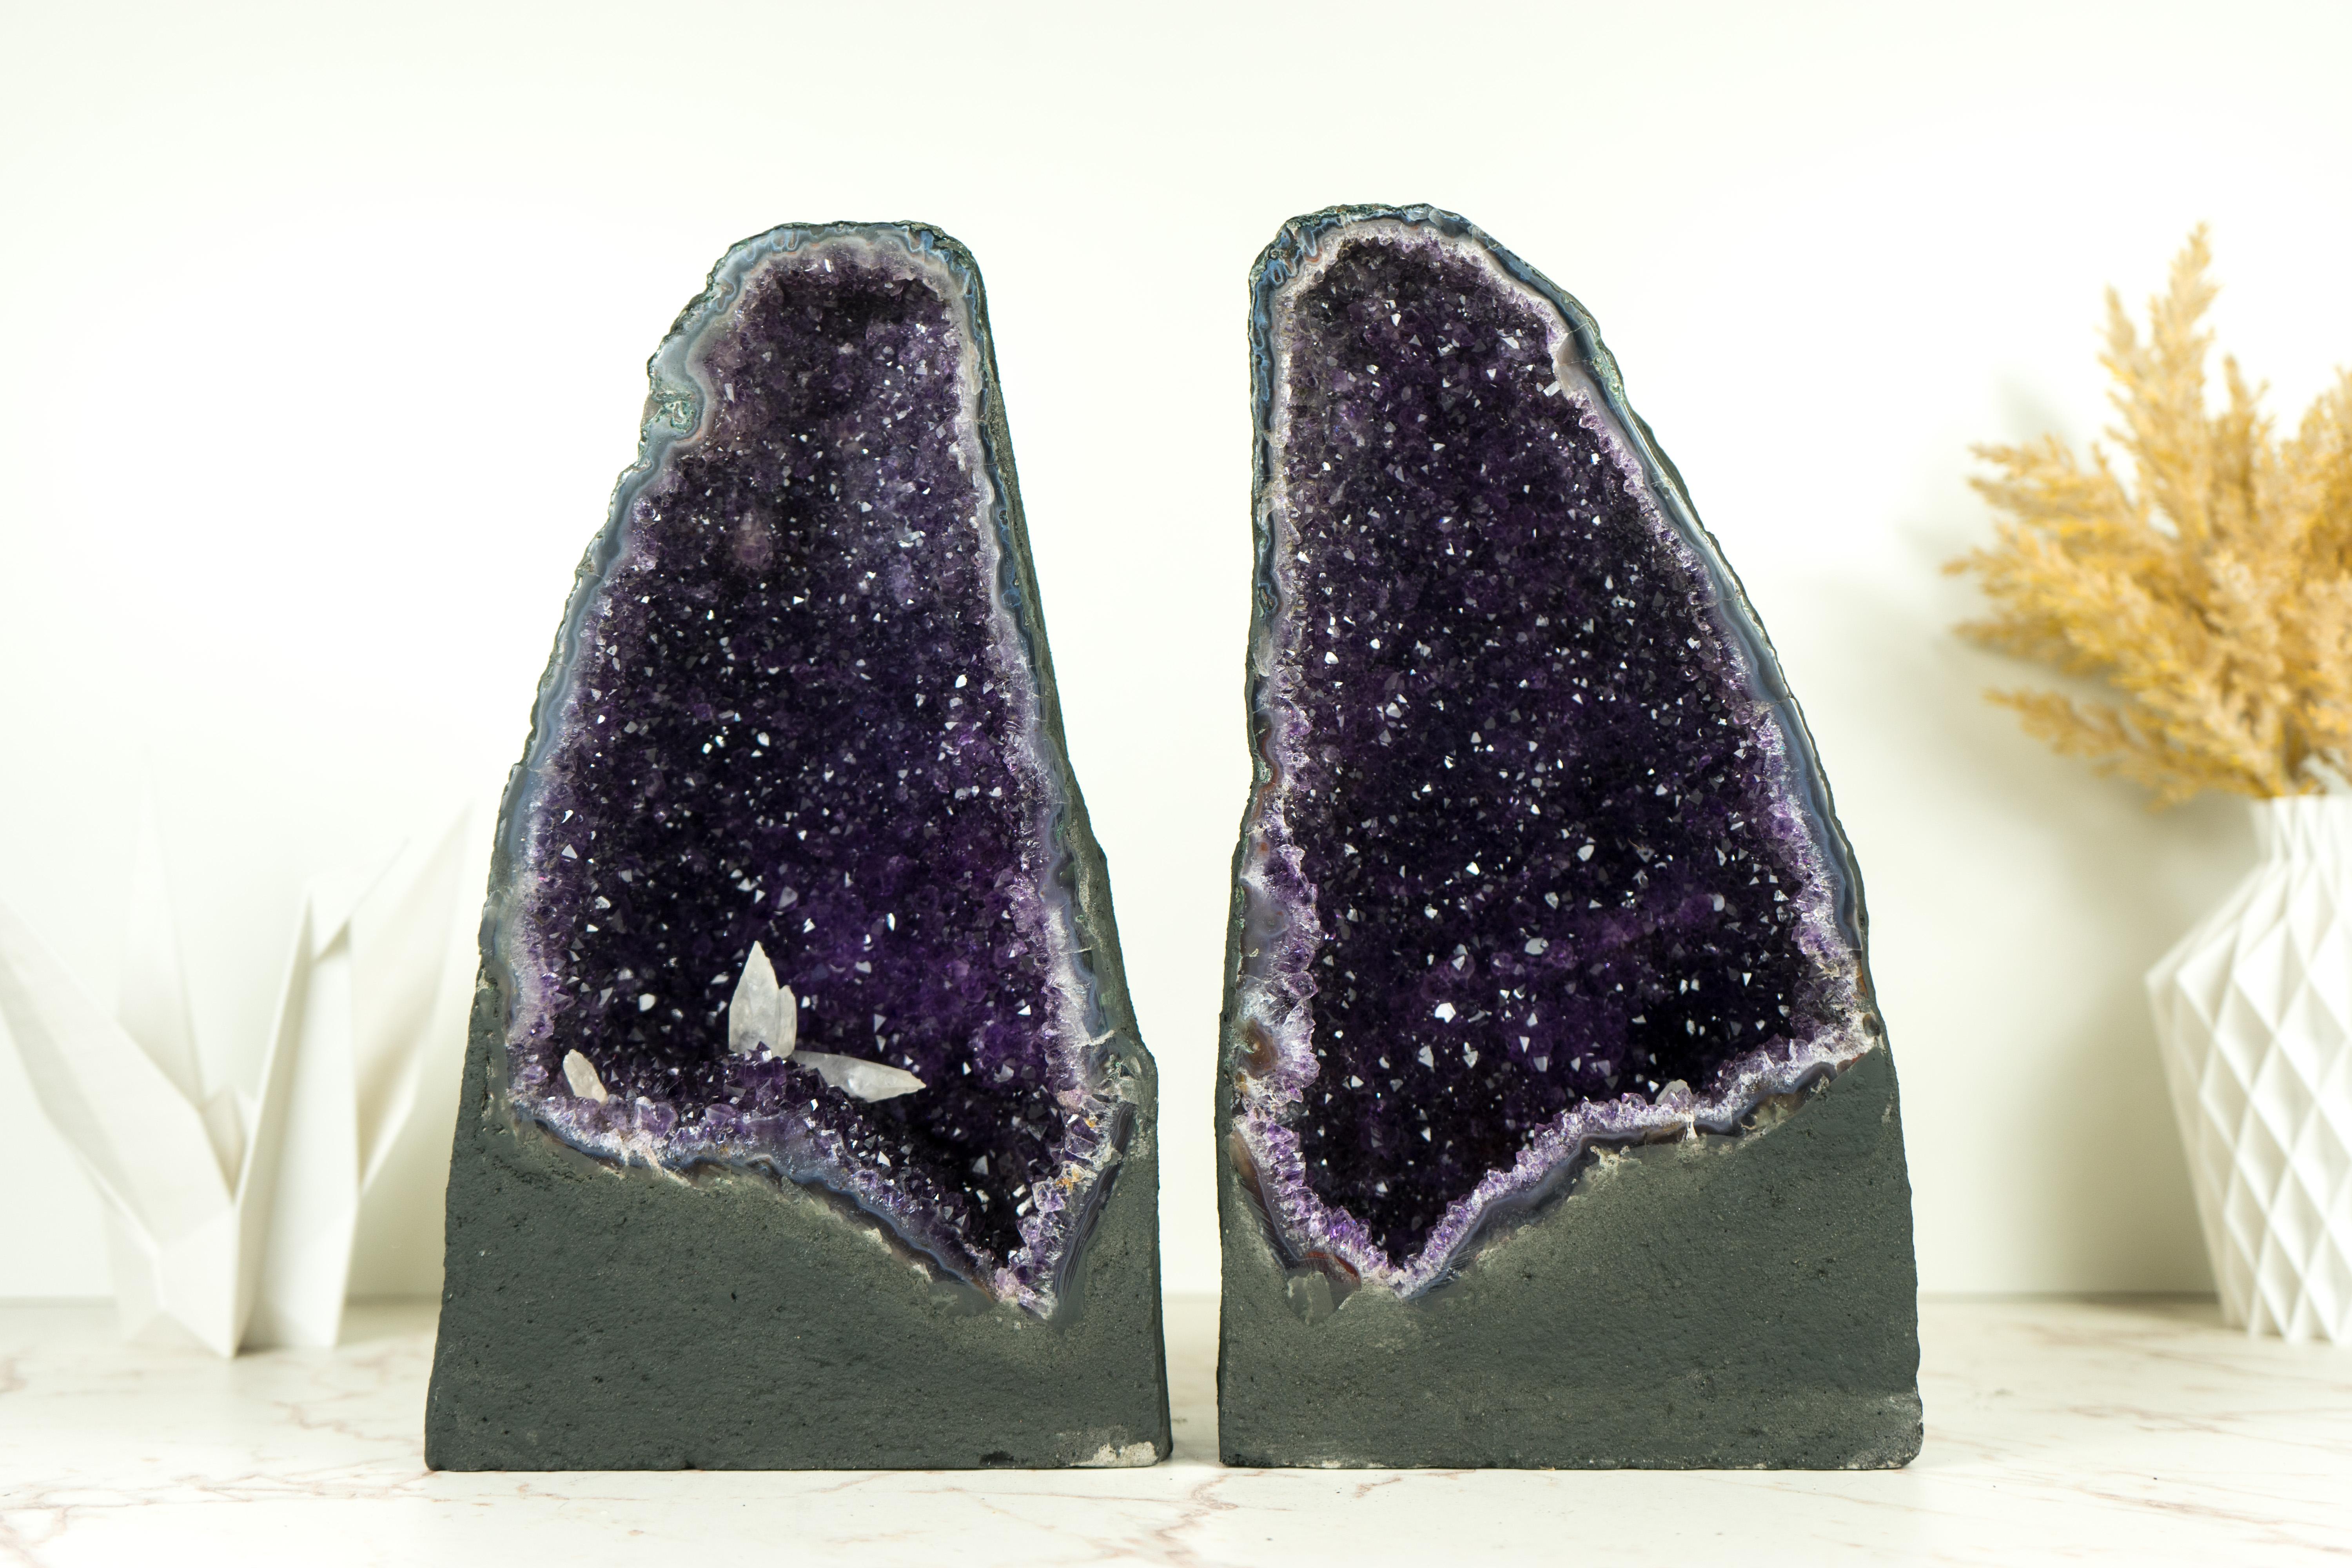 An exquisite pair of Amethyst Geode Caves, these specimens stand as a testament to nature's artistry. Formed over millions of years, this geode boasts unique and rare characteristics, including the sparkling galaxy Amethyst, a deep natural purple